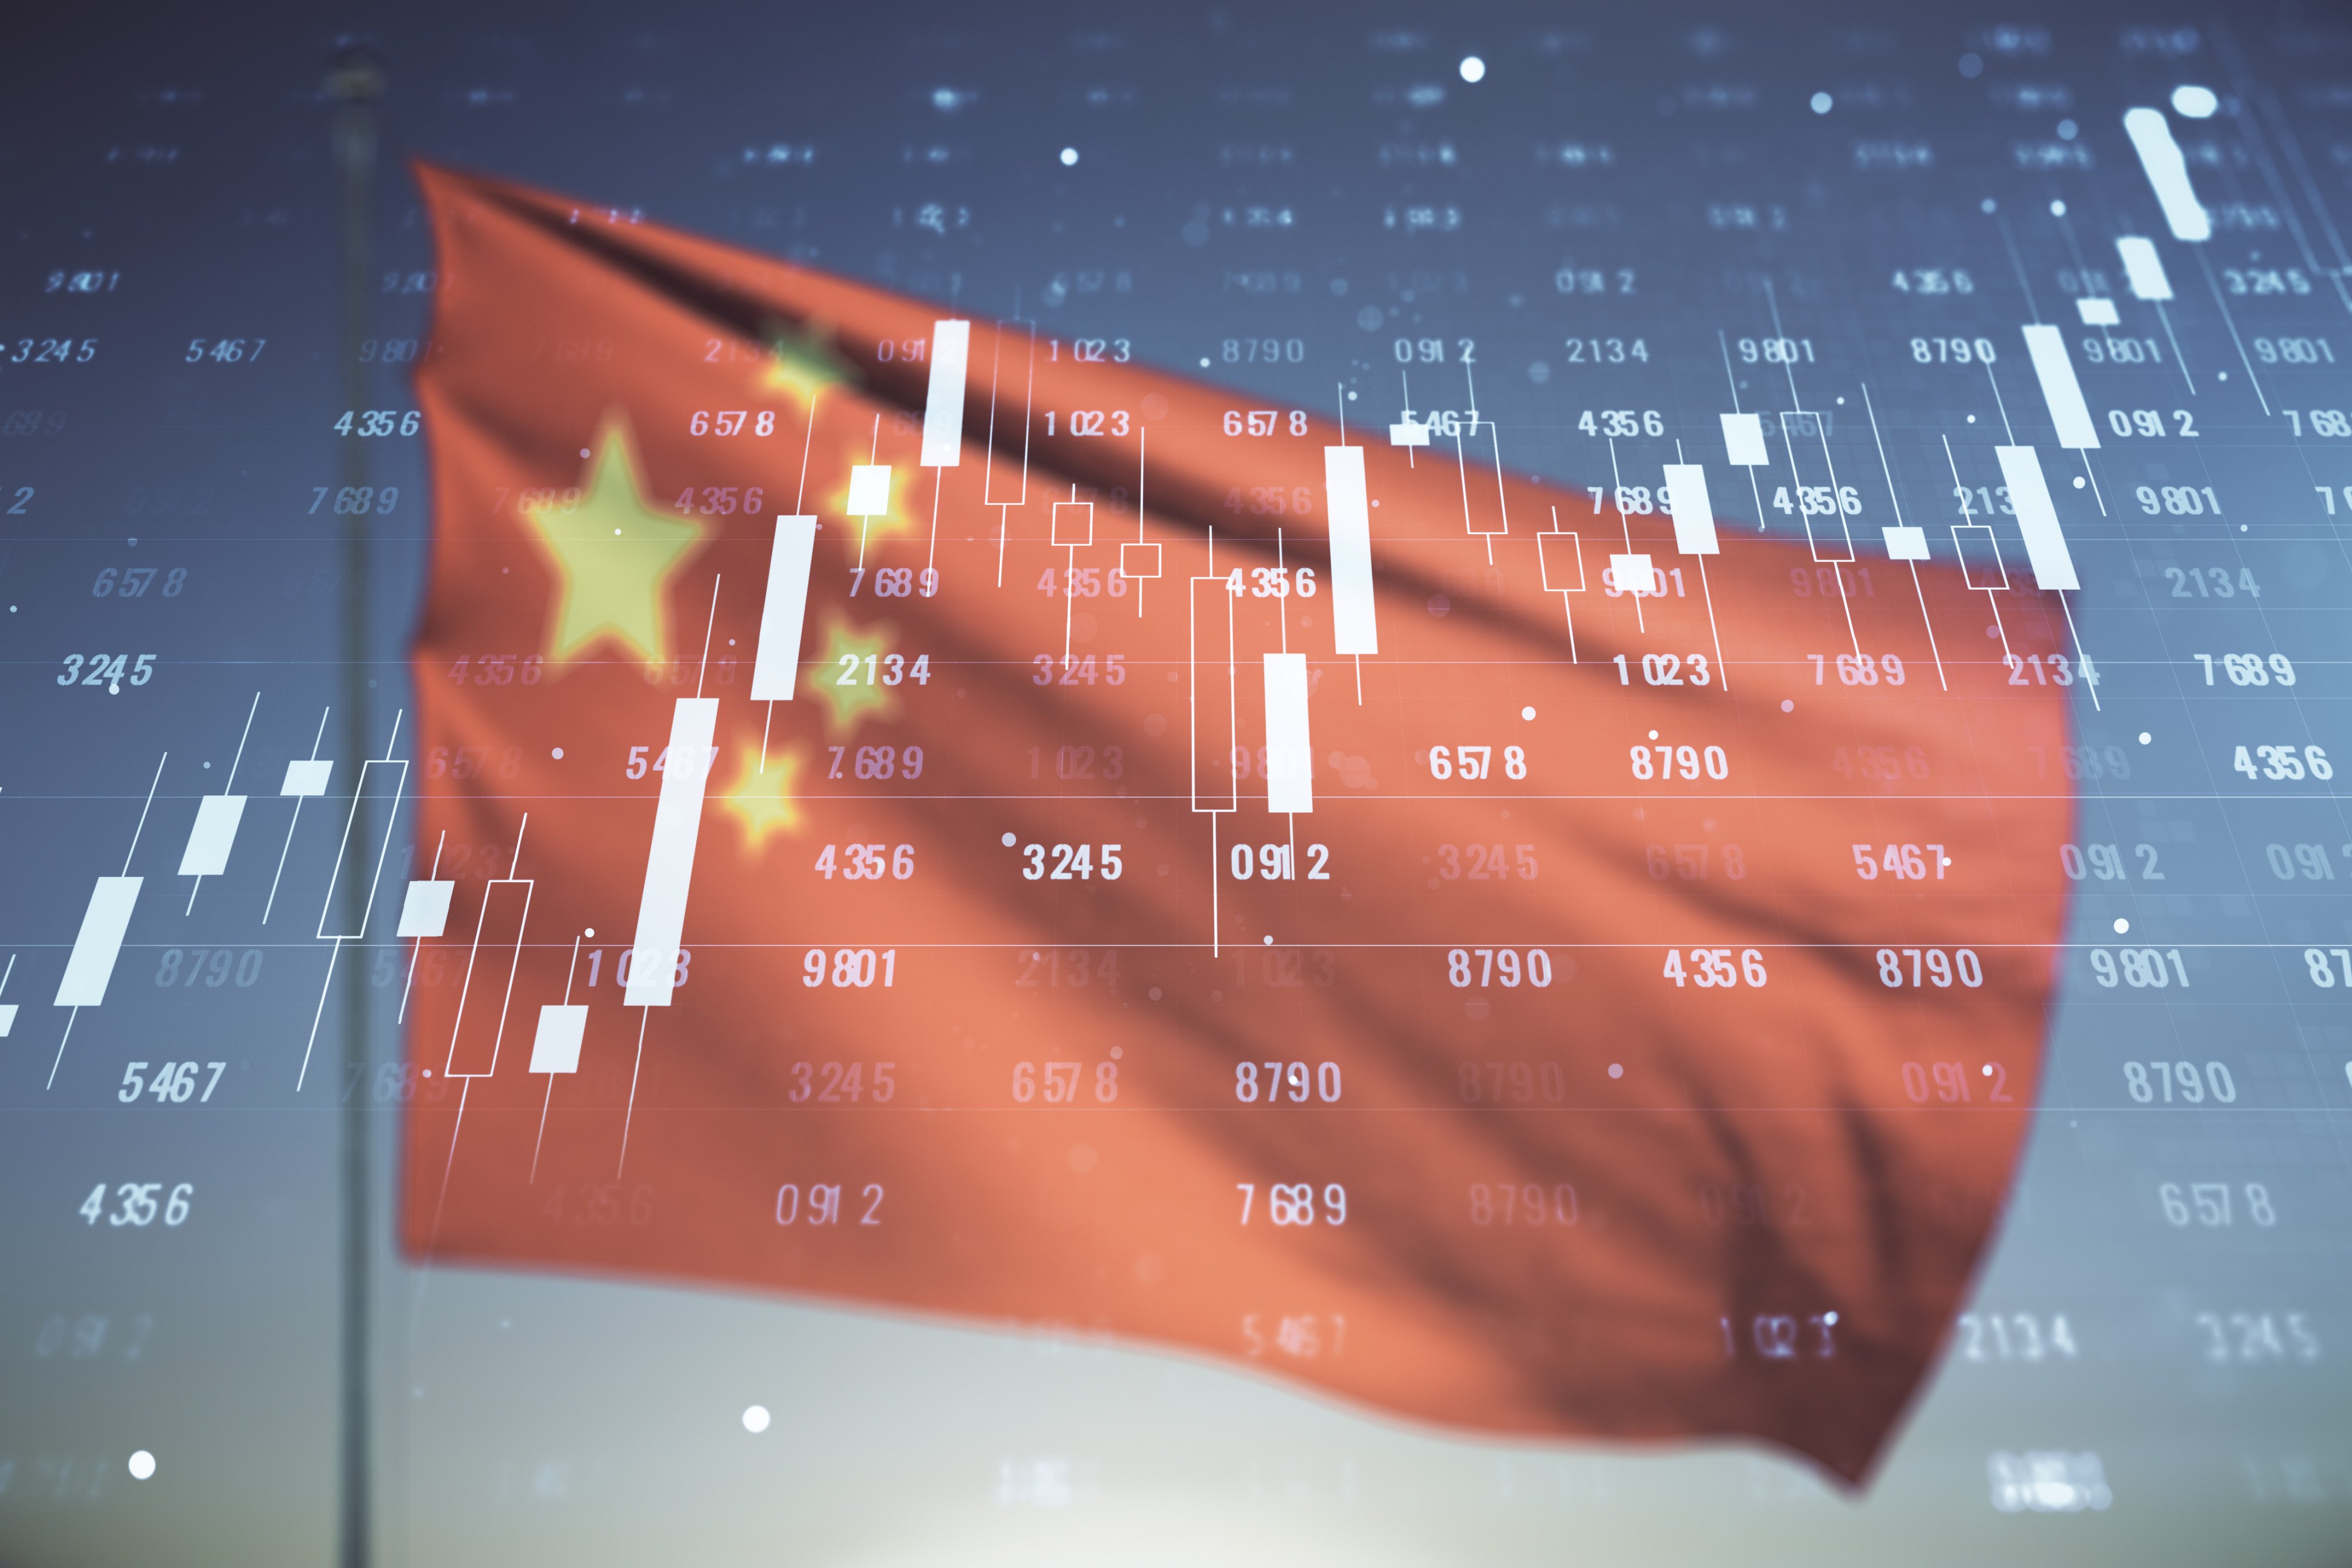 Investment banks including Goldman Sachs, UBS and BNP have become more positive on stocks in China, where foreign selling has also subsided Photo: Shutterstock